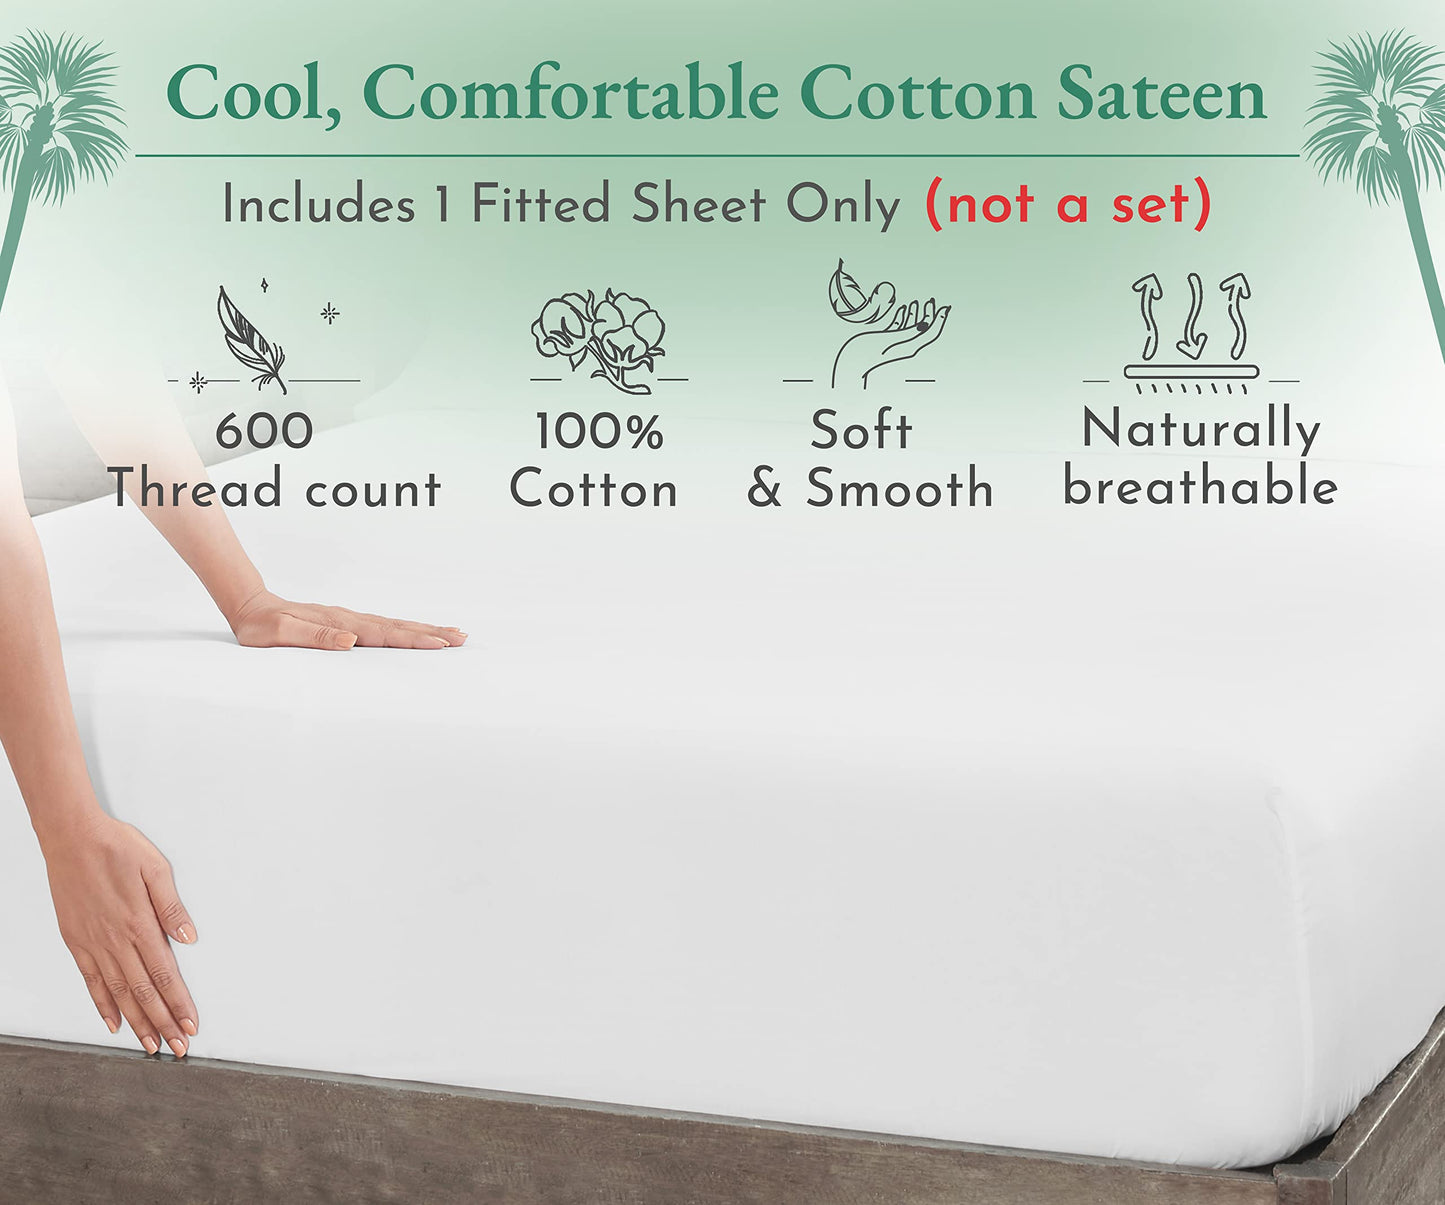 Luxuriously Soft Twin Fitted Sheet, 600 Thread Count Cooling Sheets, Sateen Weave, 100% Cotton Sheets, No-Pop Elastic for Snug Fit, Deep Pocket Bottom Sheet with Head & Foot Tag (Bright White)